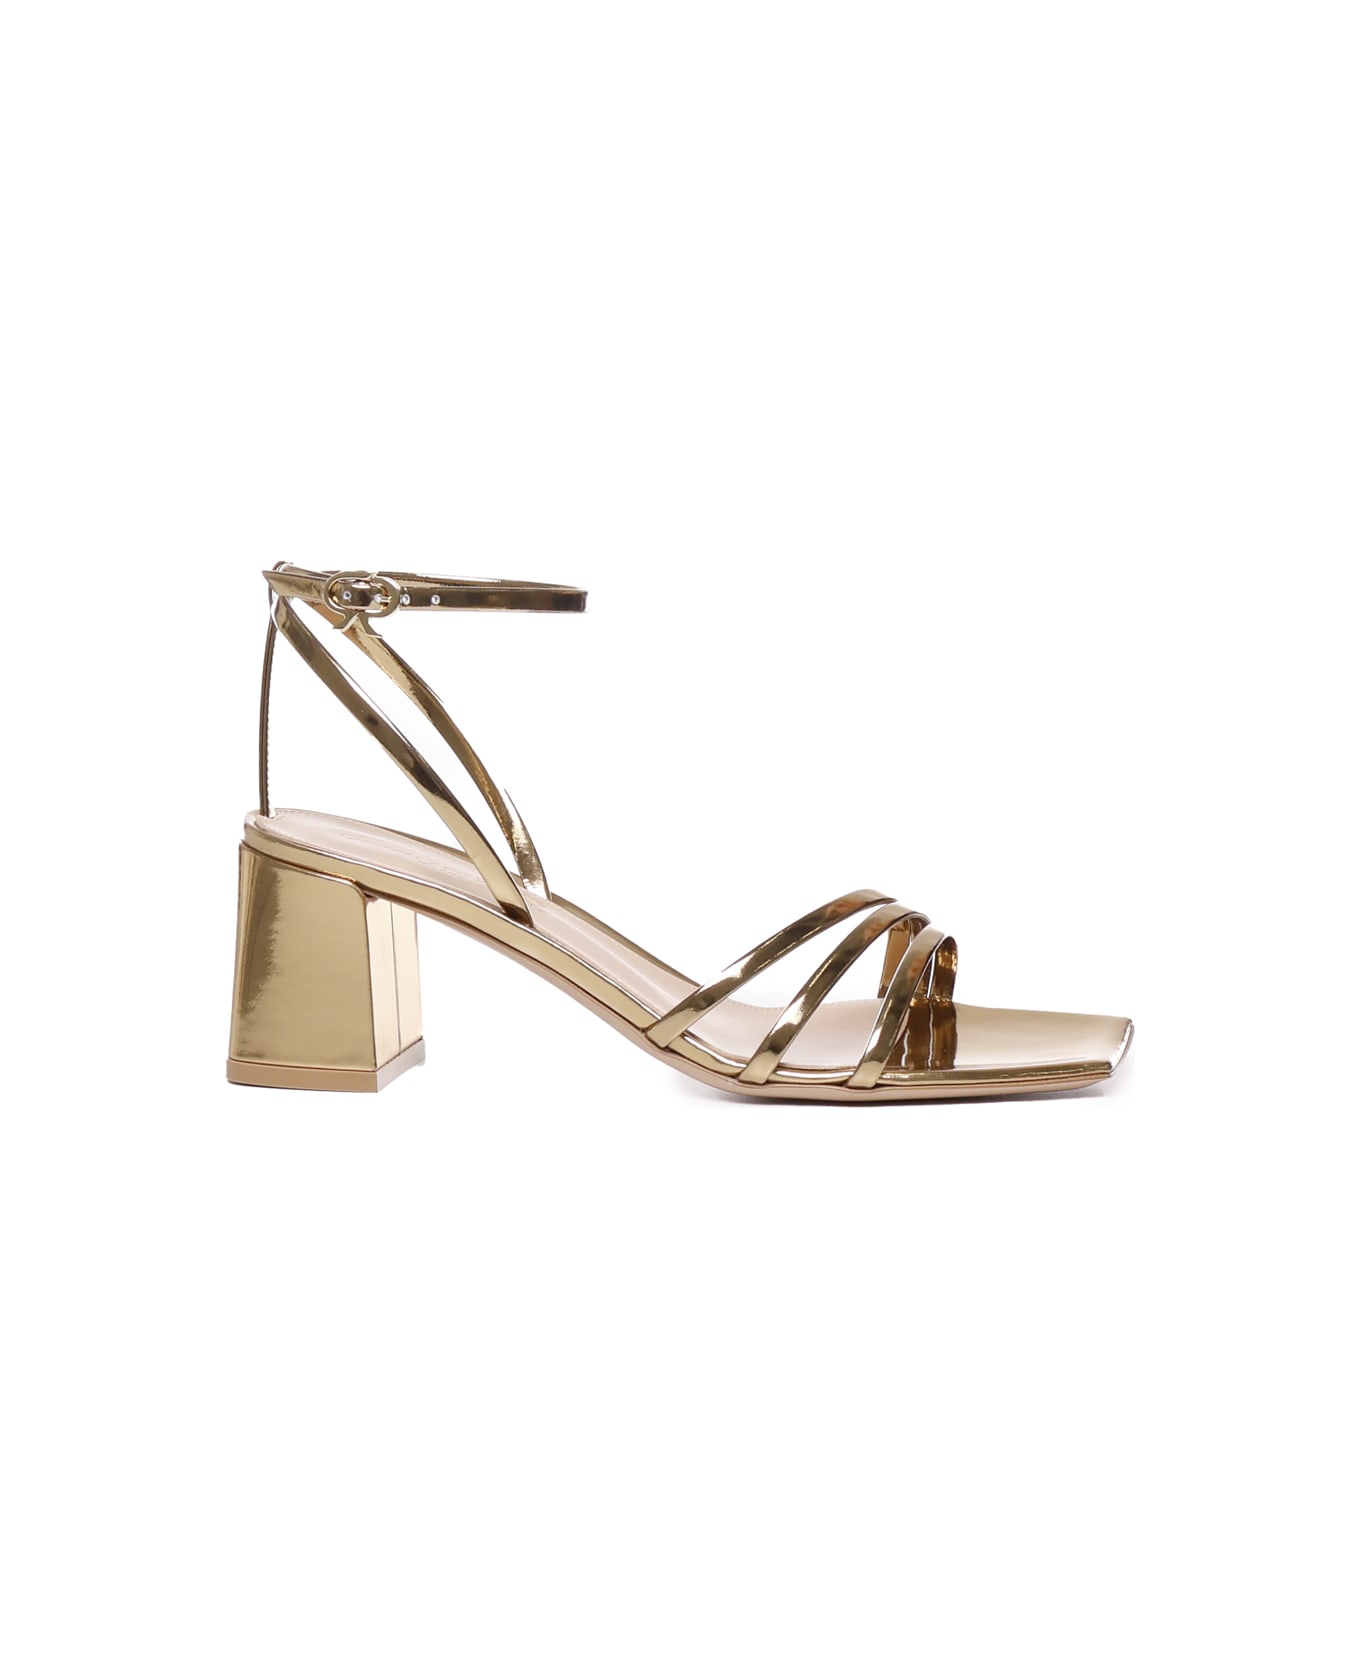 Gianvito Rossi Patent Leather Sandals - Mekong